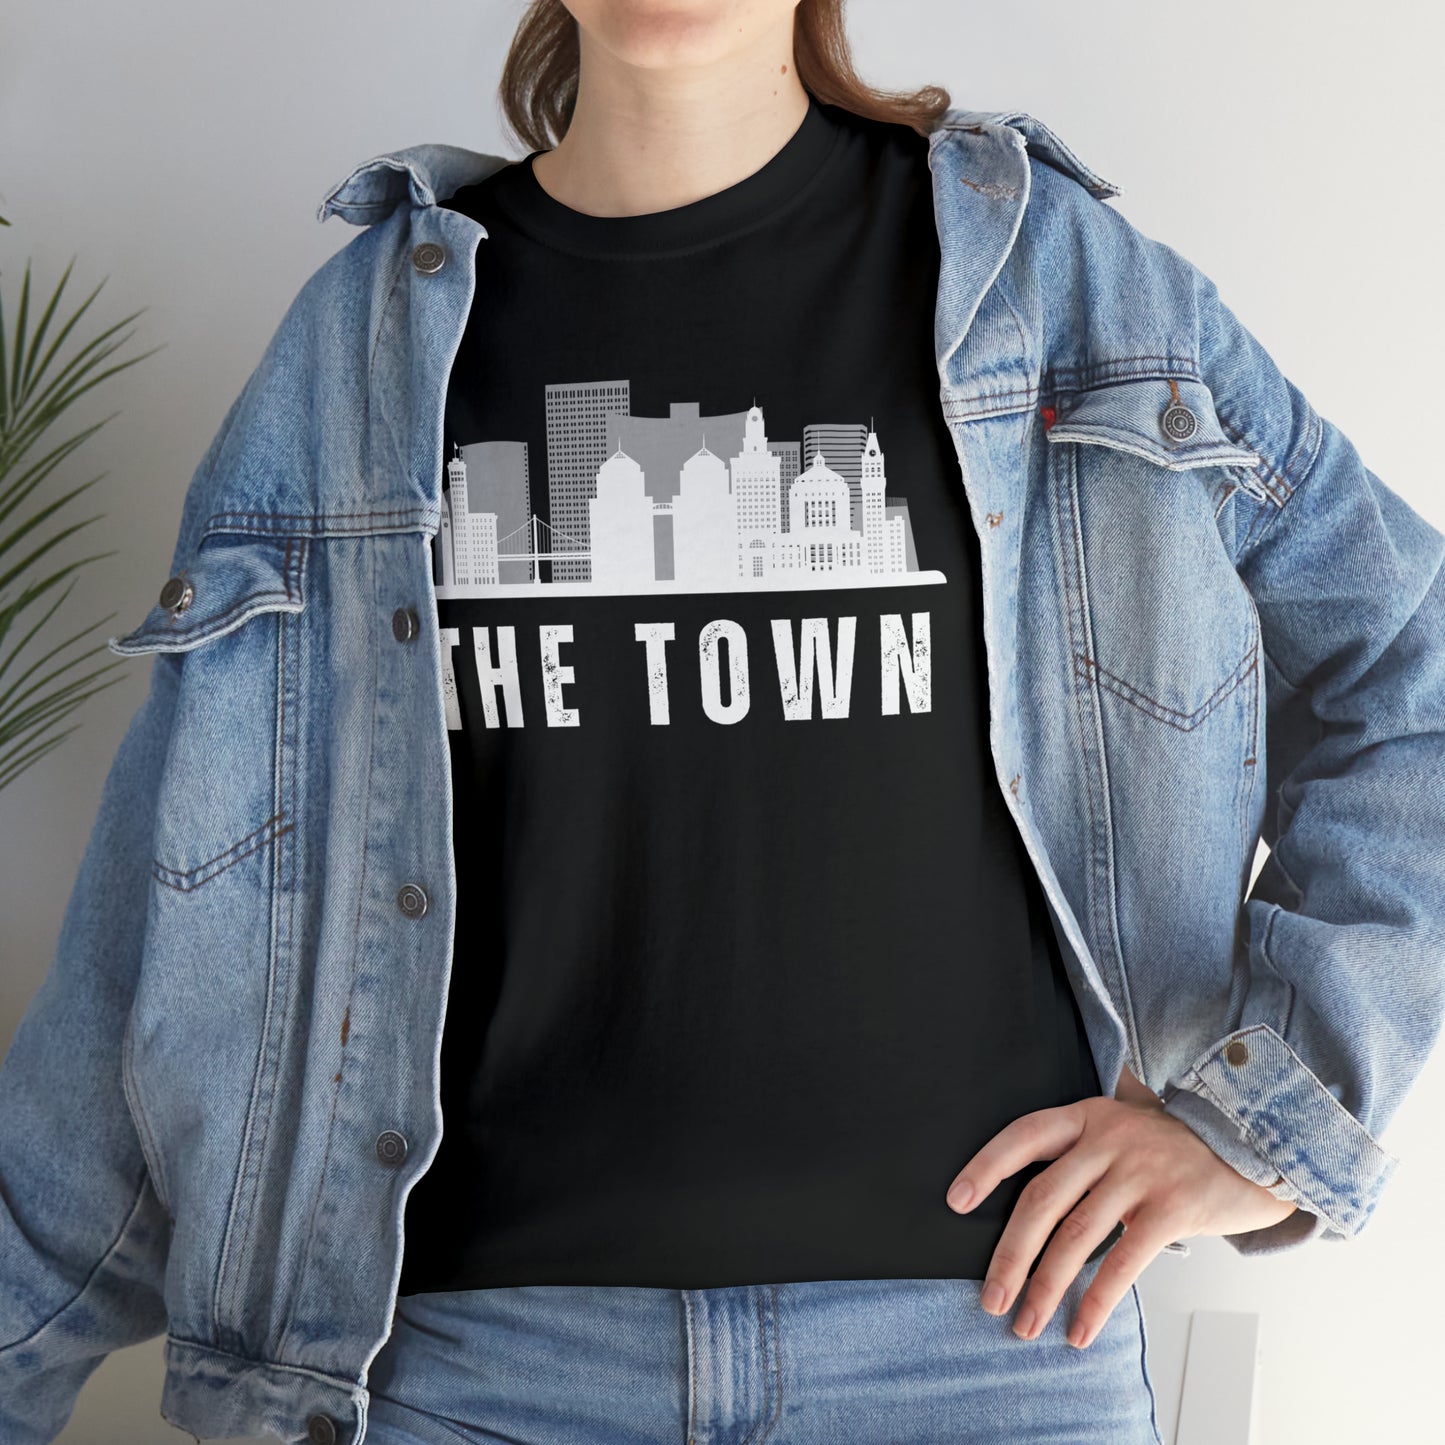 The Town Unisex Heavy Cotton Tee | Oakland Athletics | Oakland Sell Shirt | Oakland Sweatshirt | Oakland A' | Bay Area Vintage Inspired Gift | Baseball Jersey